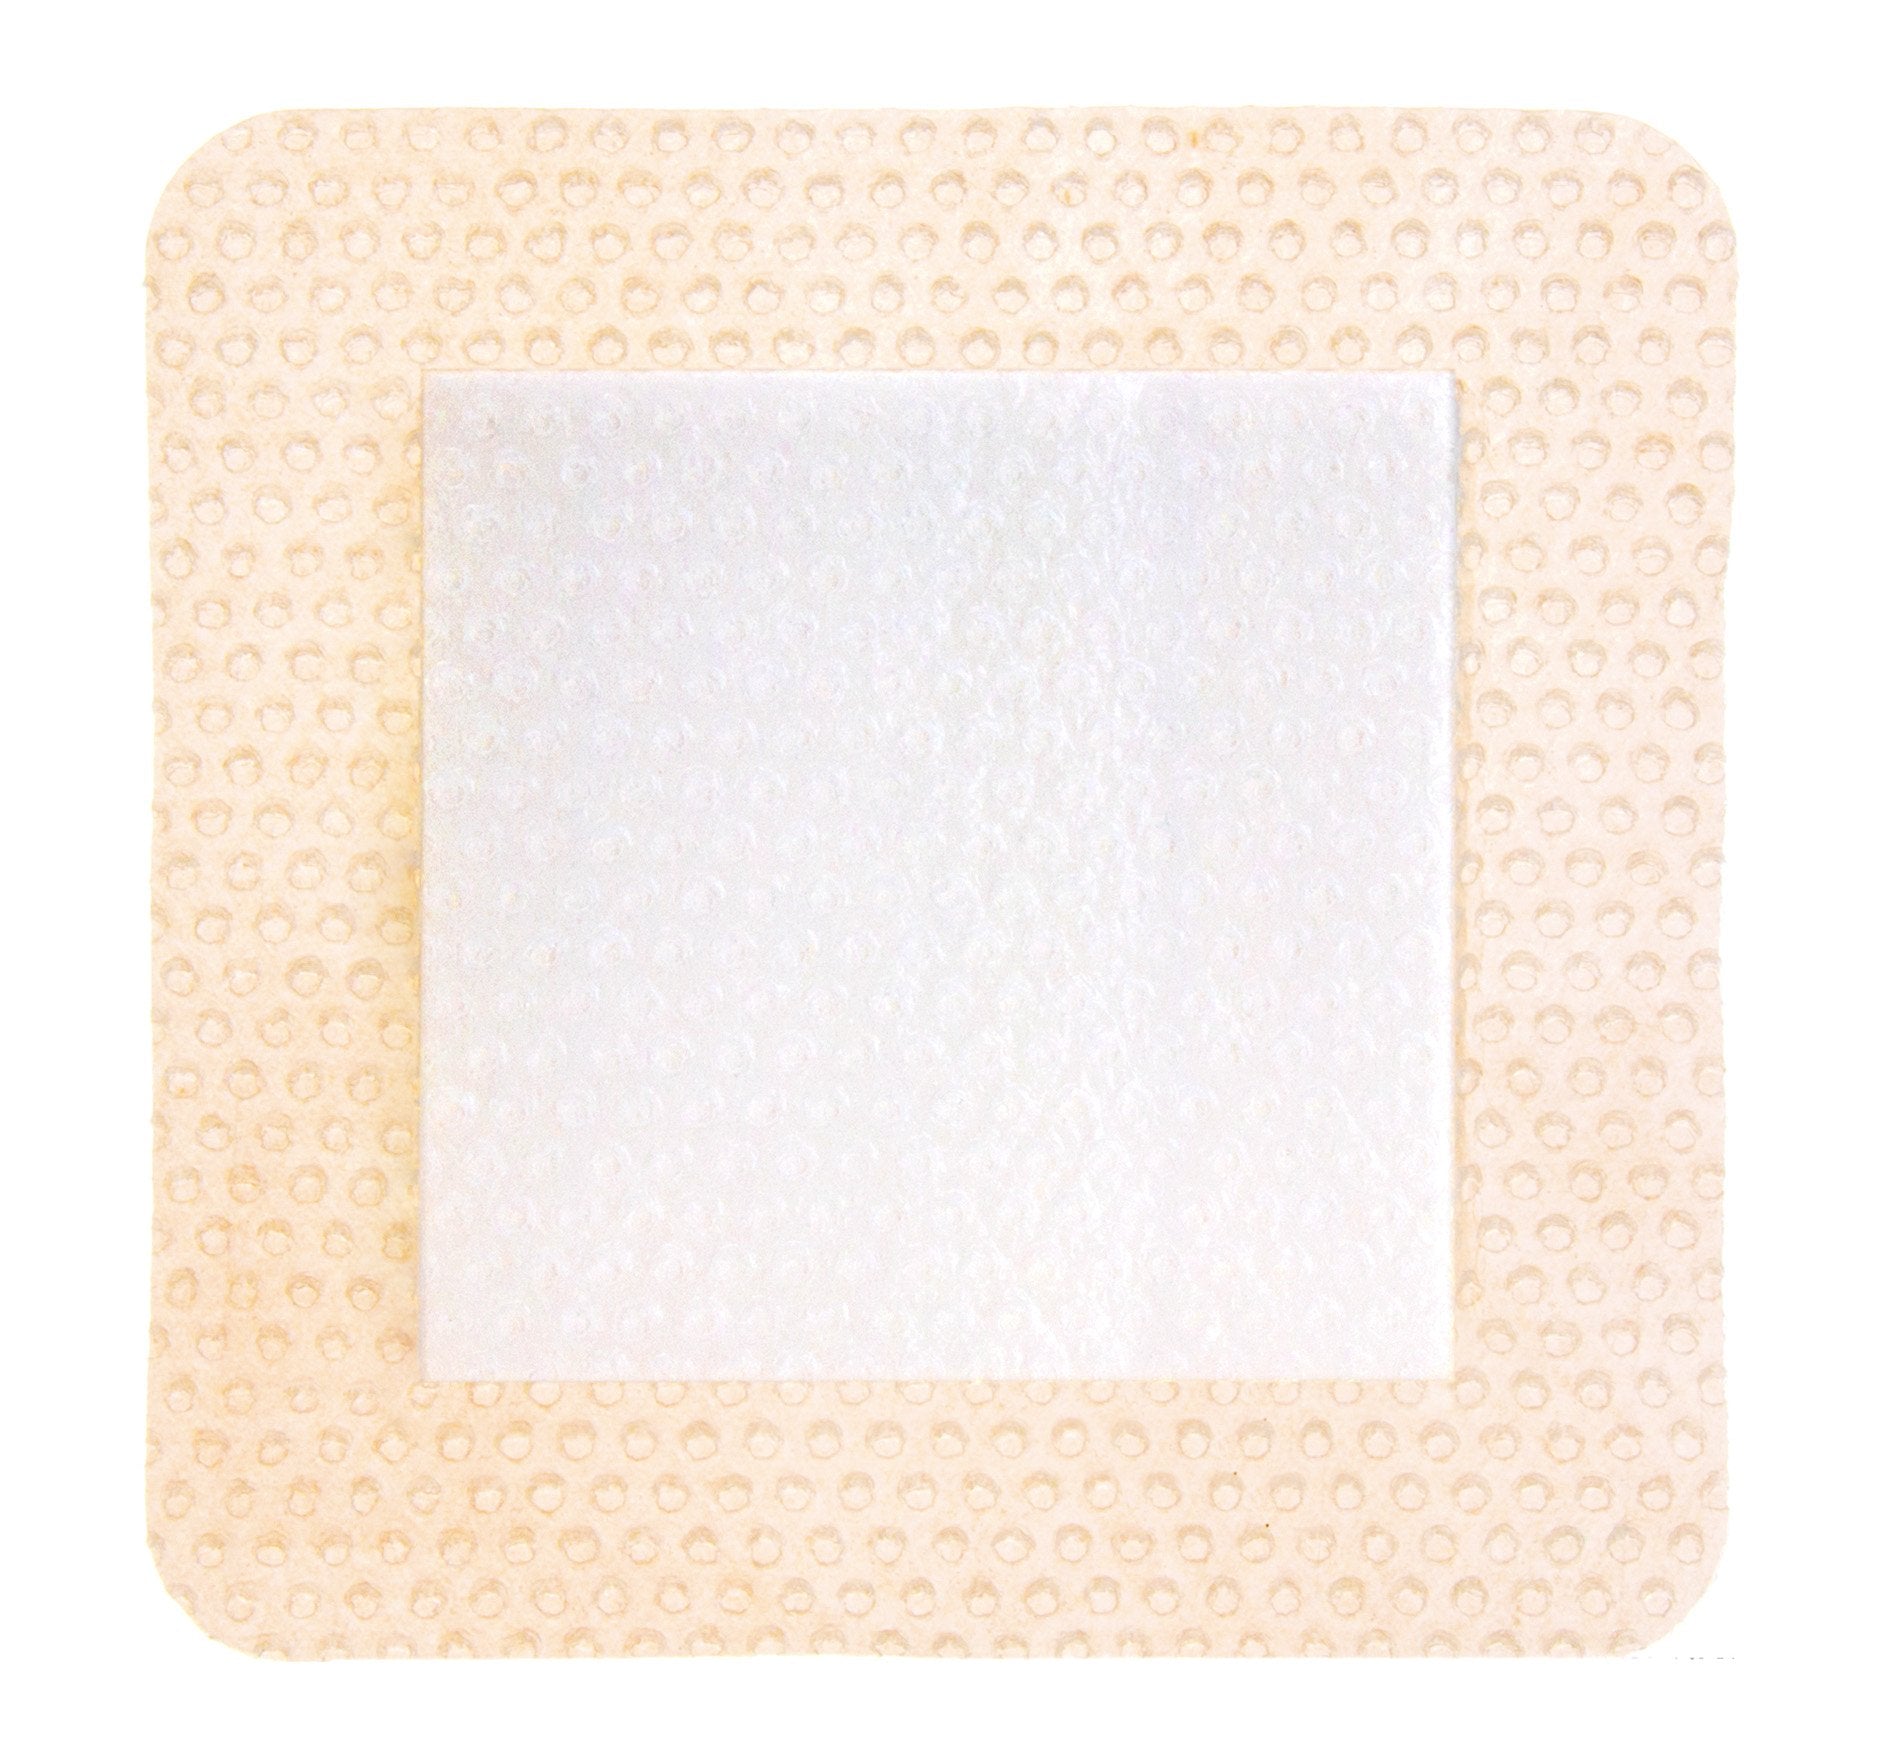 Foam Dressing ComfortFoam™ Border 2 X 5 Inch With Border Waterproof Backing Silicone Adhesive Rectangle Sterile